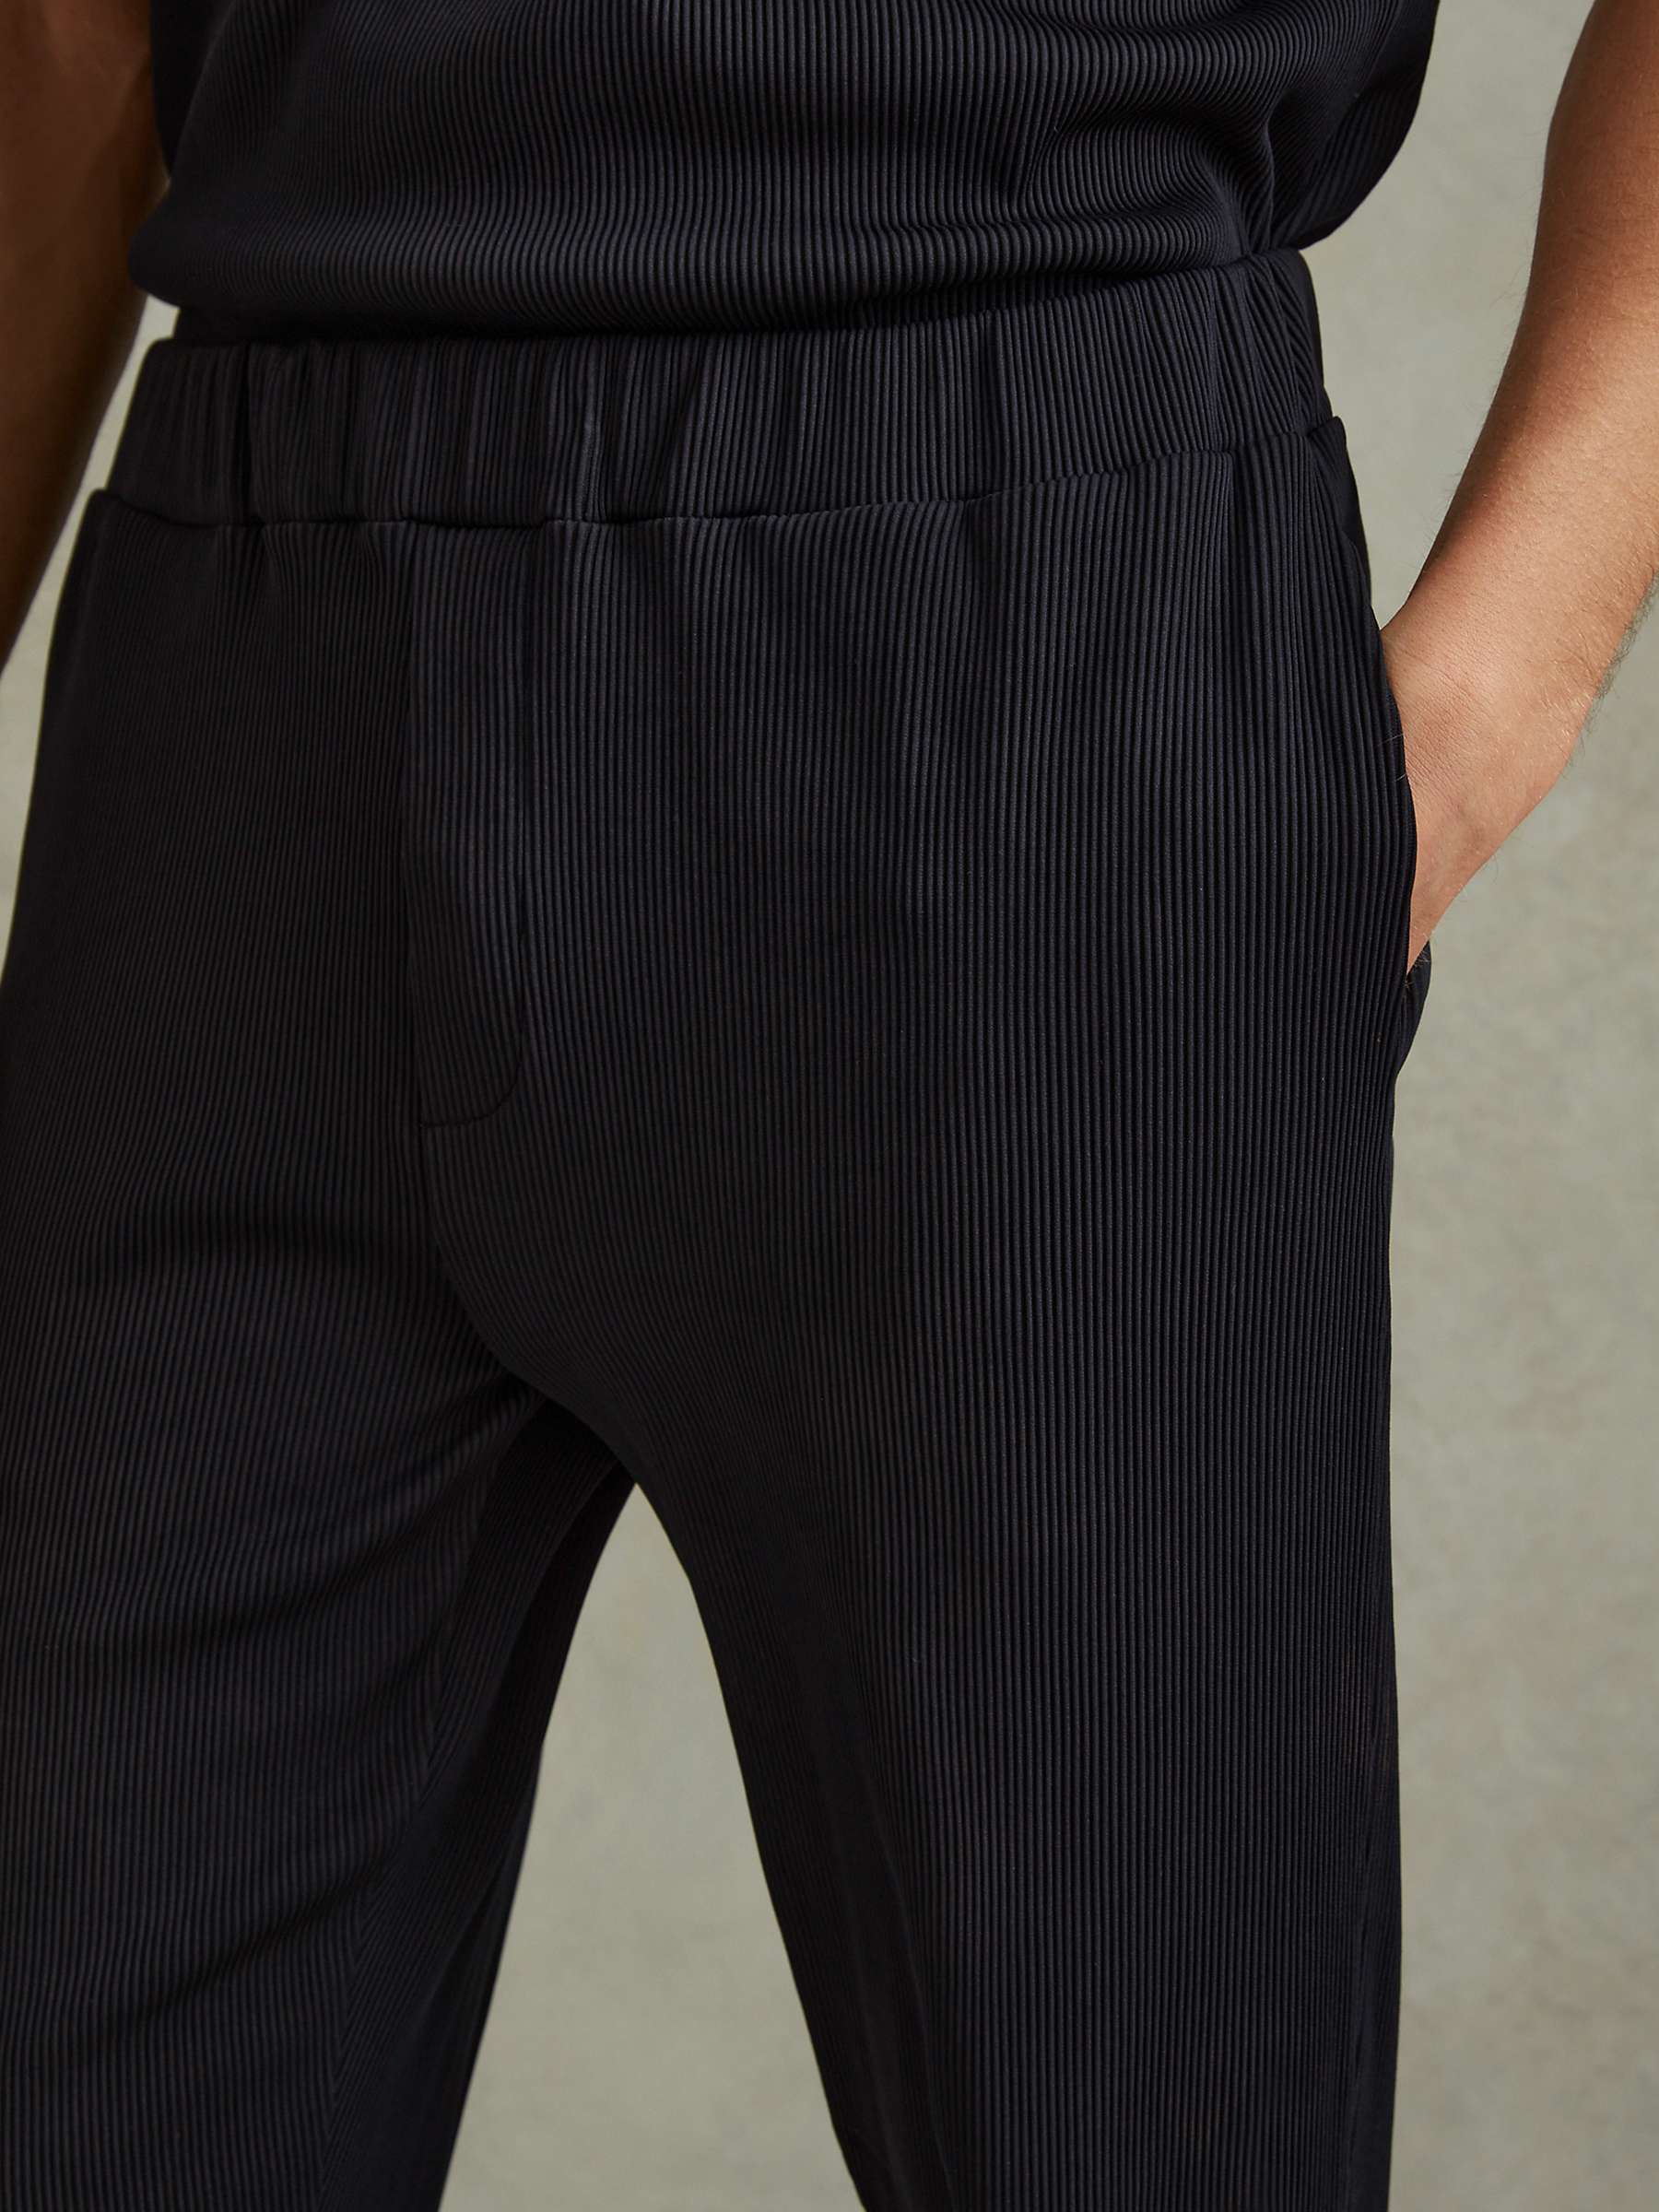 Buy Reiss Cyrus Trousers Online at johnlewis.com